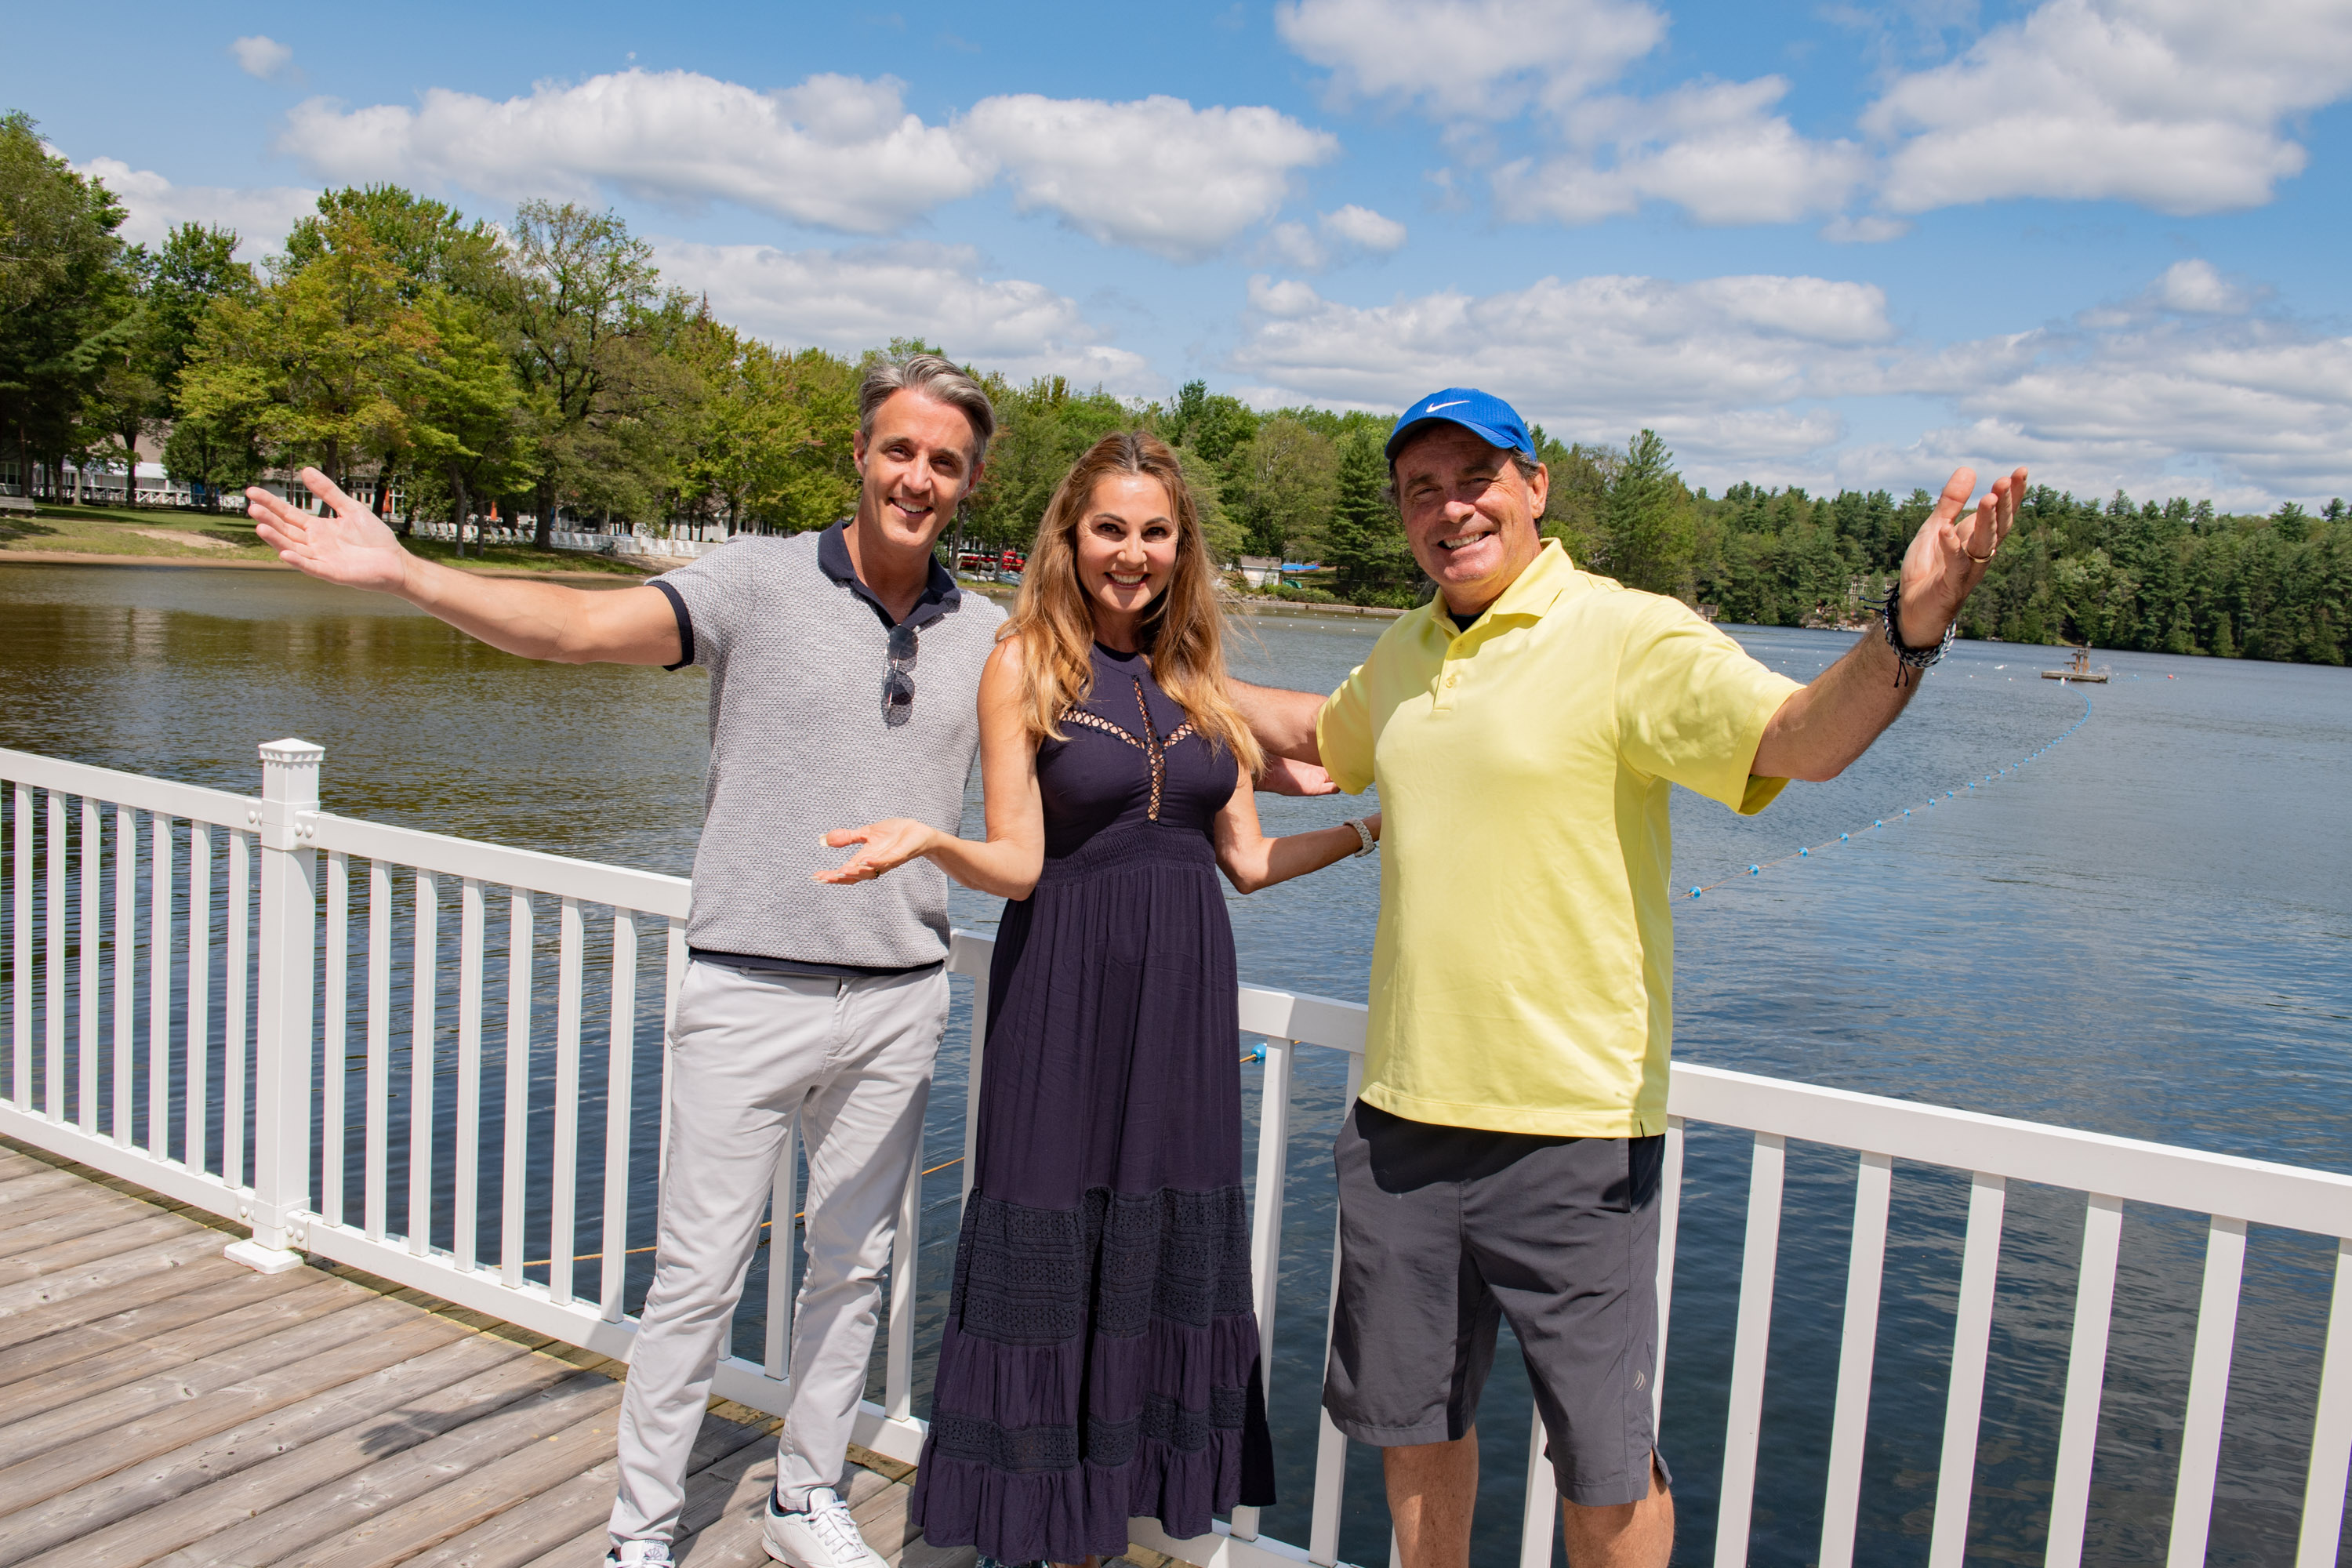 Celebrities Ben Mulroney, Joan Kelly Walker and Rod Black smiling with their arms outstretched on the CNIB Lake Joe dock